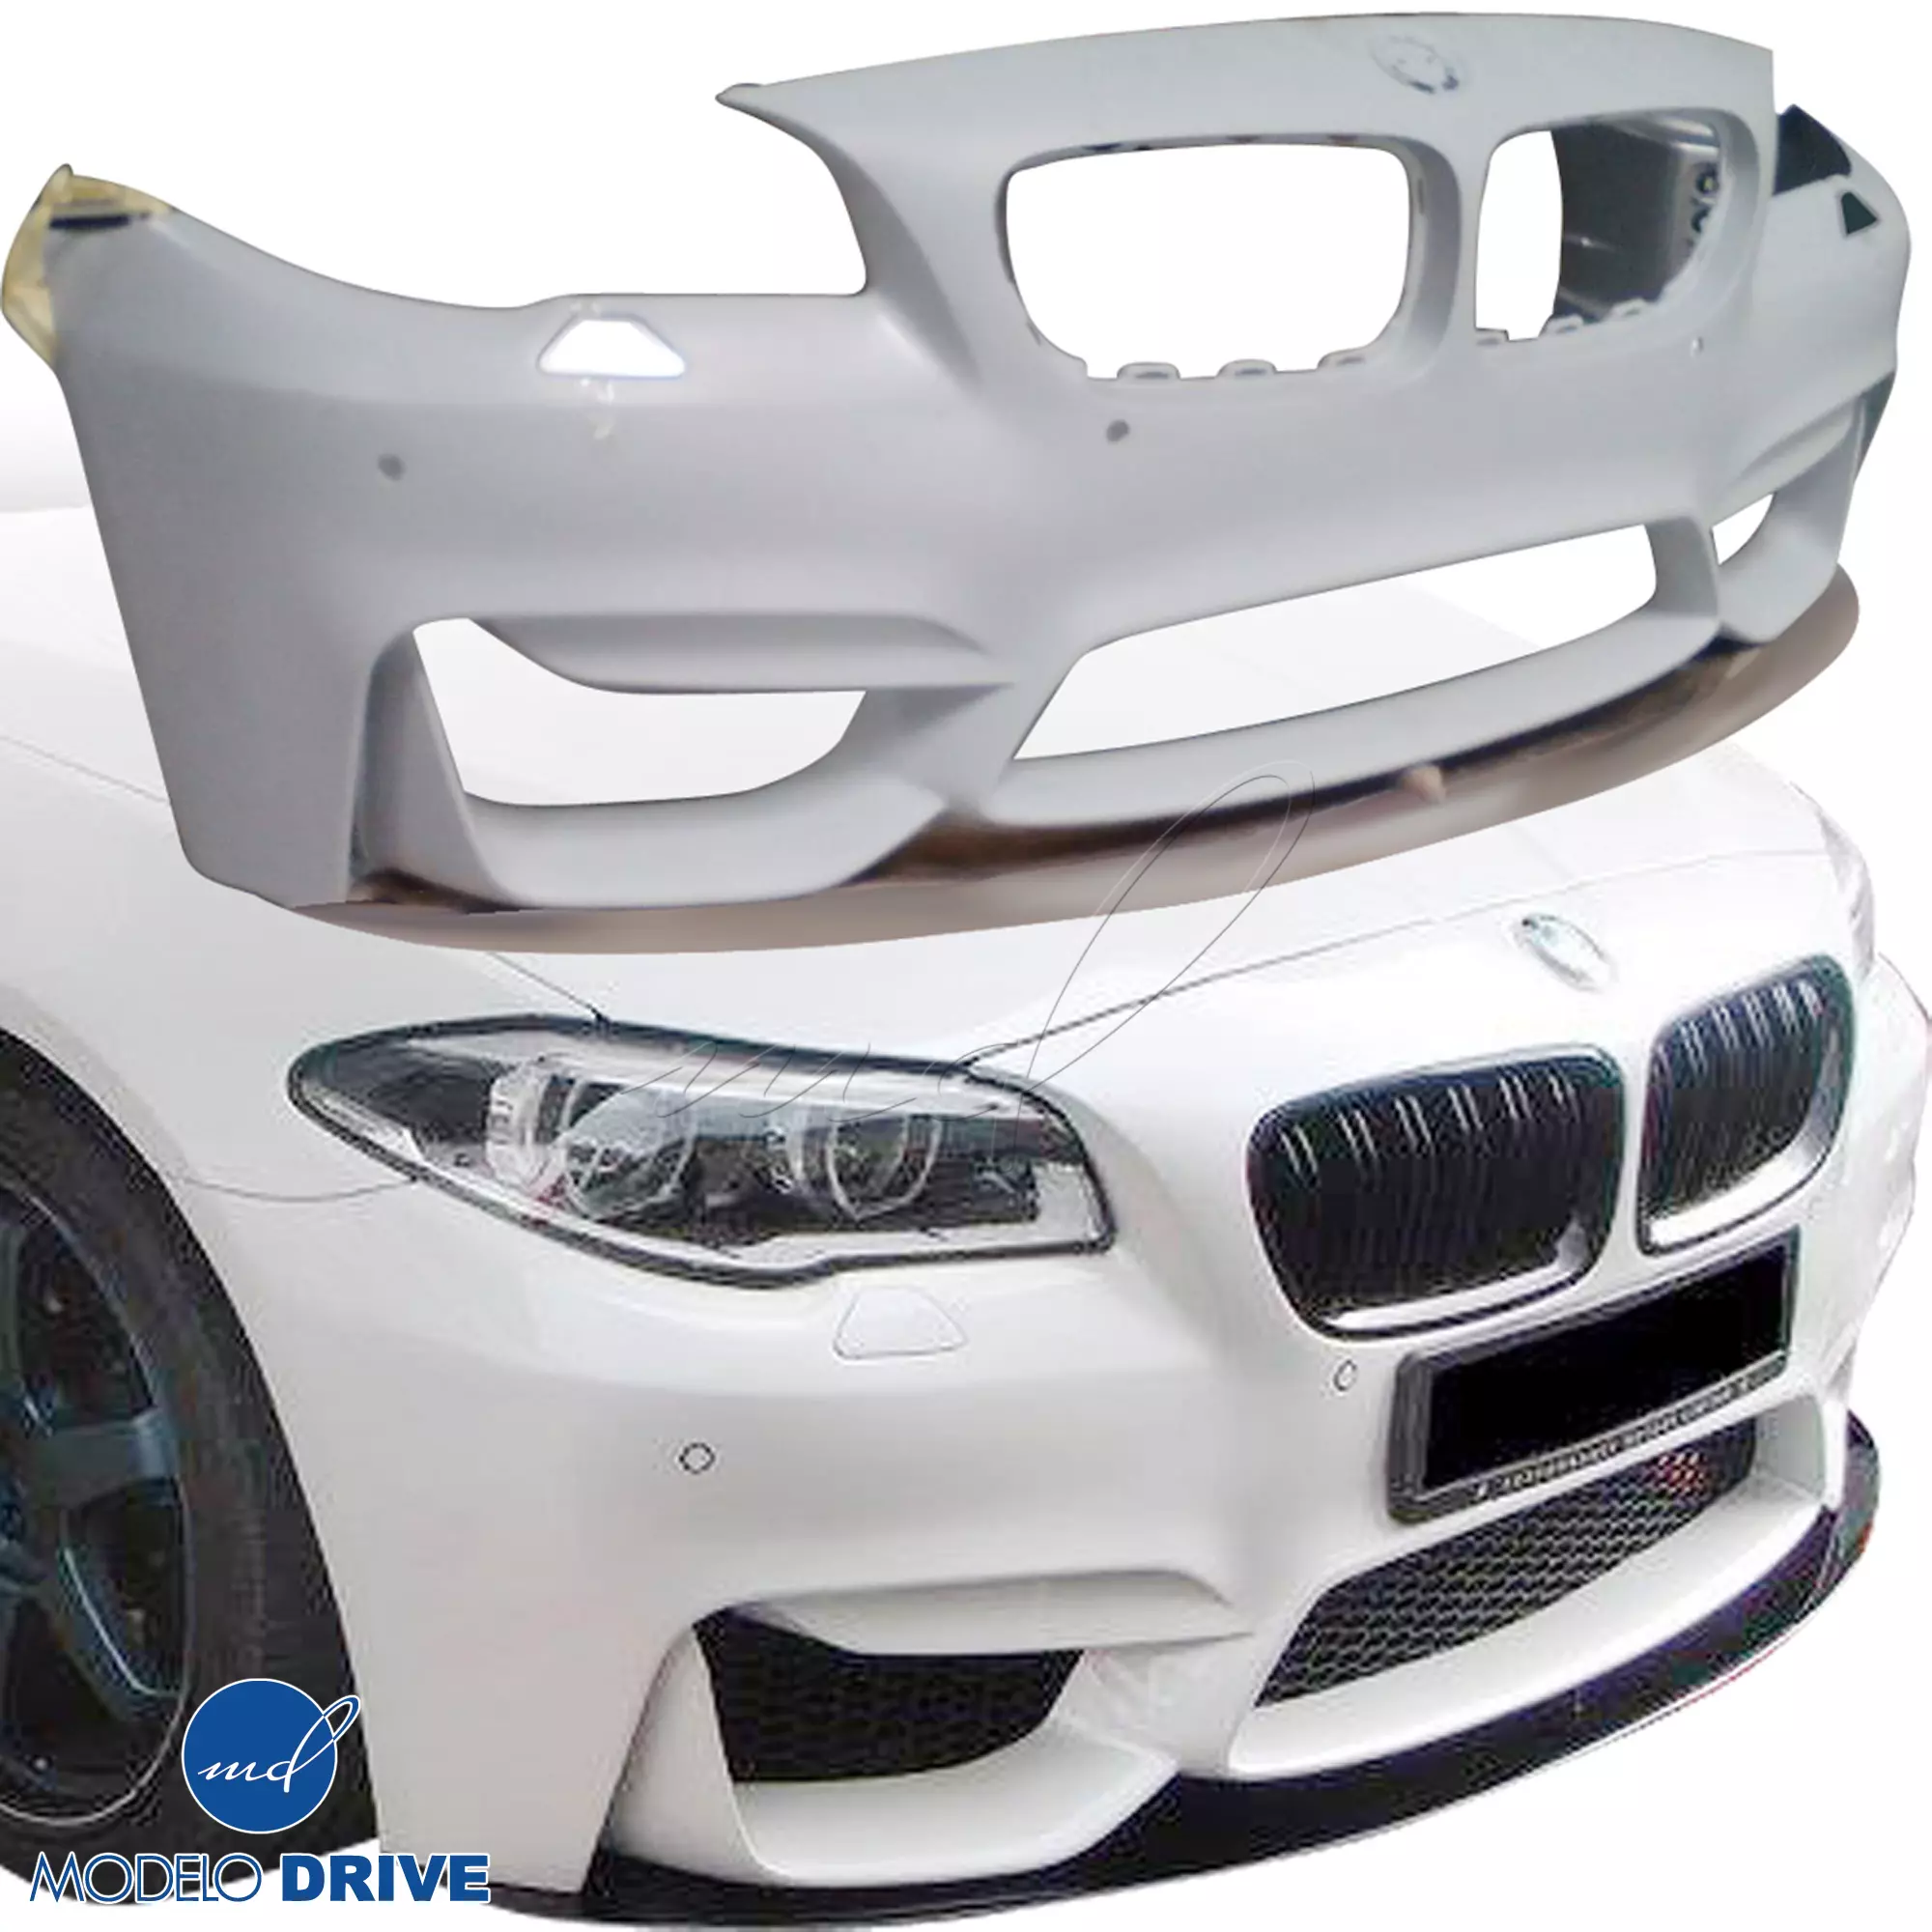 ModeloDrive FRP Type-M4 Style Front Bumper and Lip 2pc > BMW 5-Series F10 2011-2016 > 4dr - Image 6